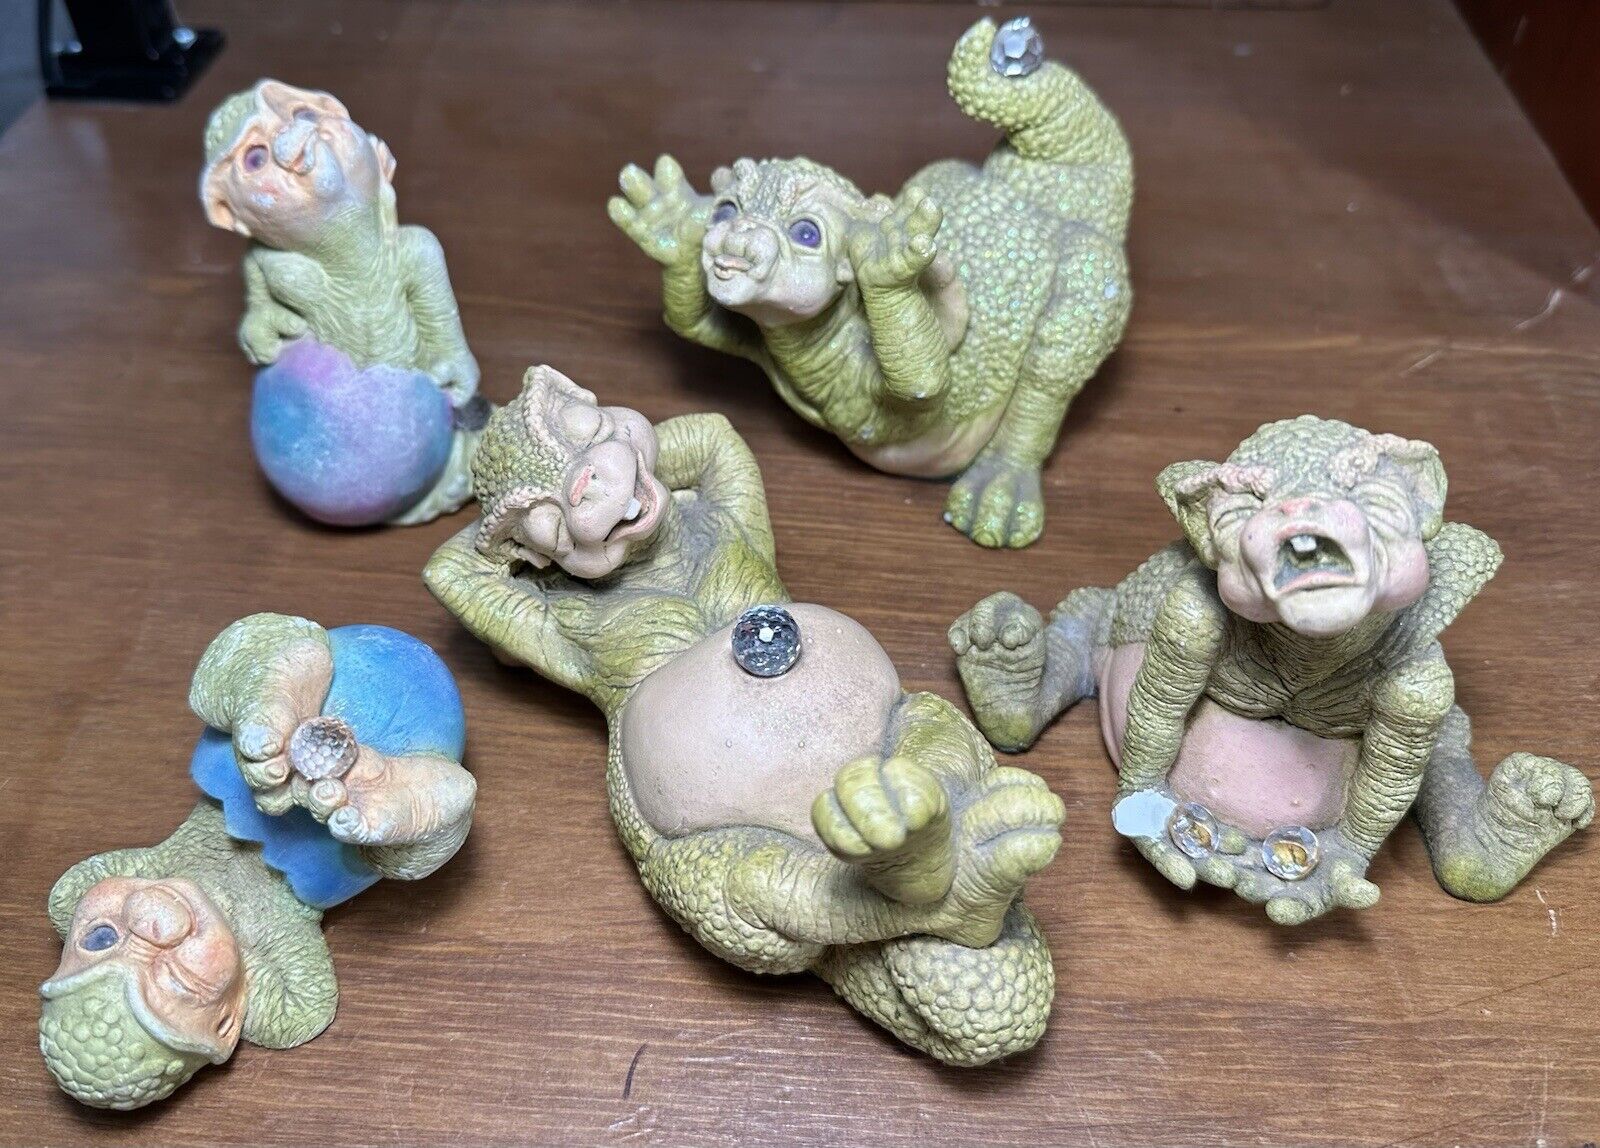 Vintage 1989 Lot Of 5 DRAGON KEEP Sculpture Figurines By Marty W/ Crystals